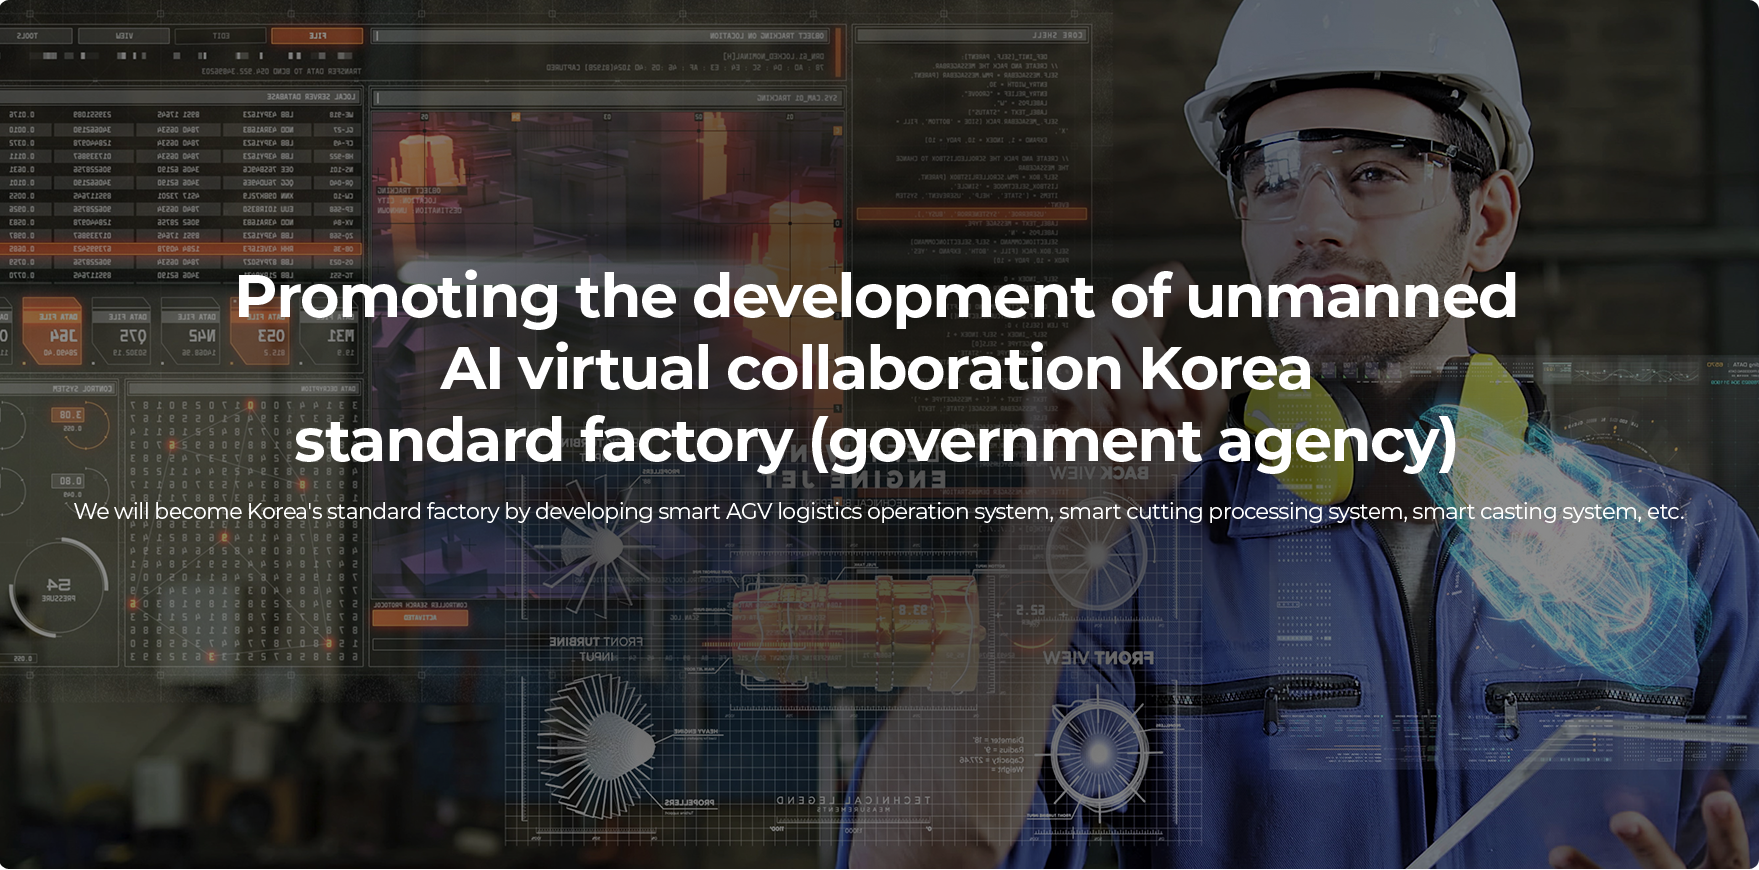 Promoting the development of unmanned AI virtual collaboration Korea standard factory (government agency)